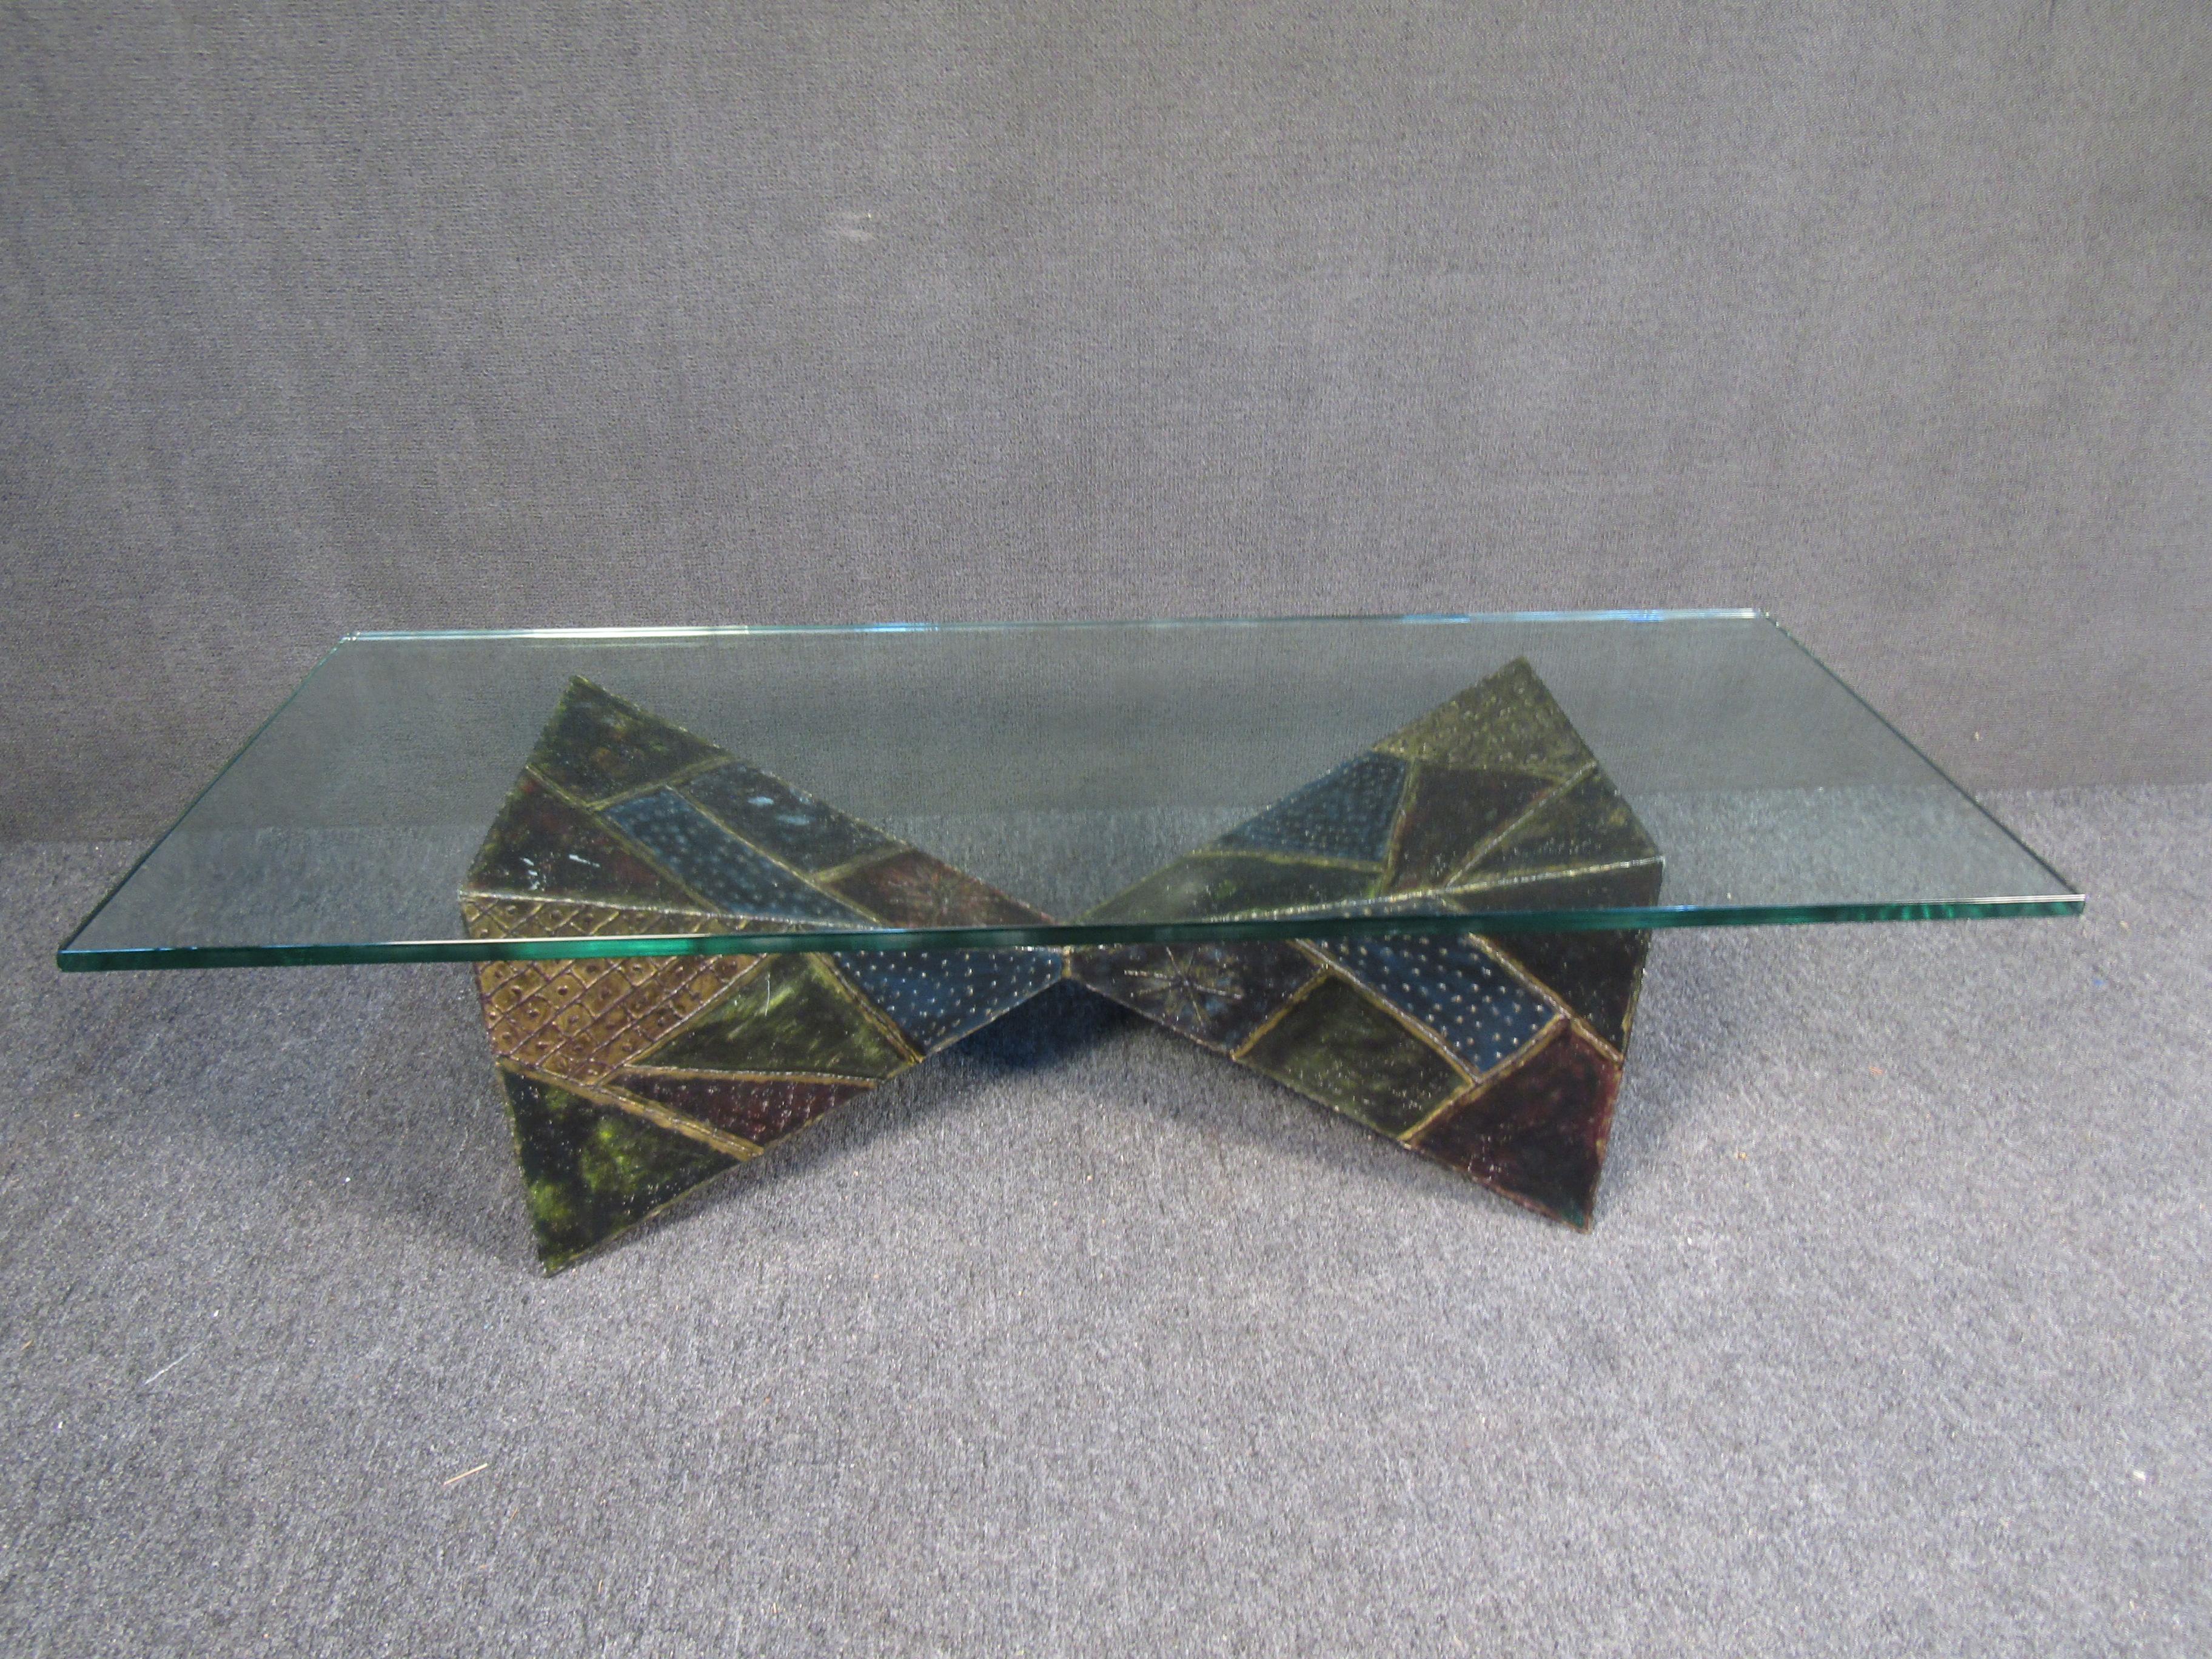 This unique coffee table by Paul Evans features contrasting textures and colors in its geometric base along with a large glass top. Rare and collectible, this vintage table by renowned designer Paul Evans is a bold statement piece anywhere its